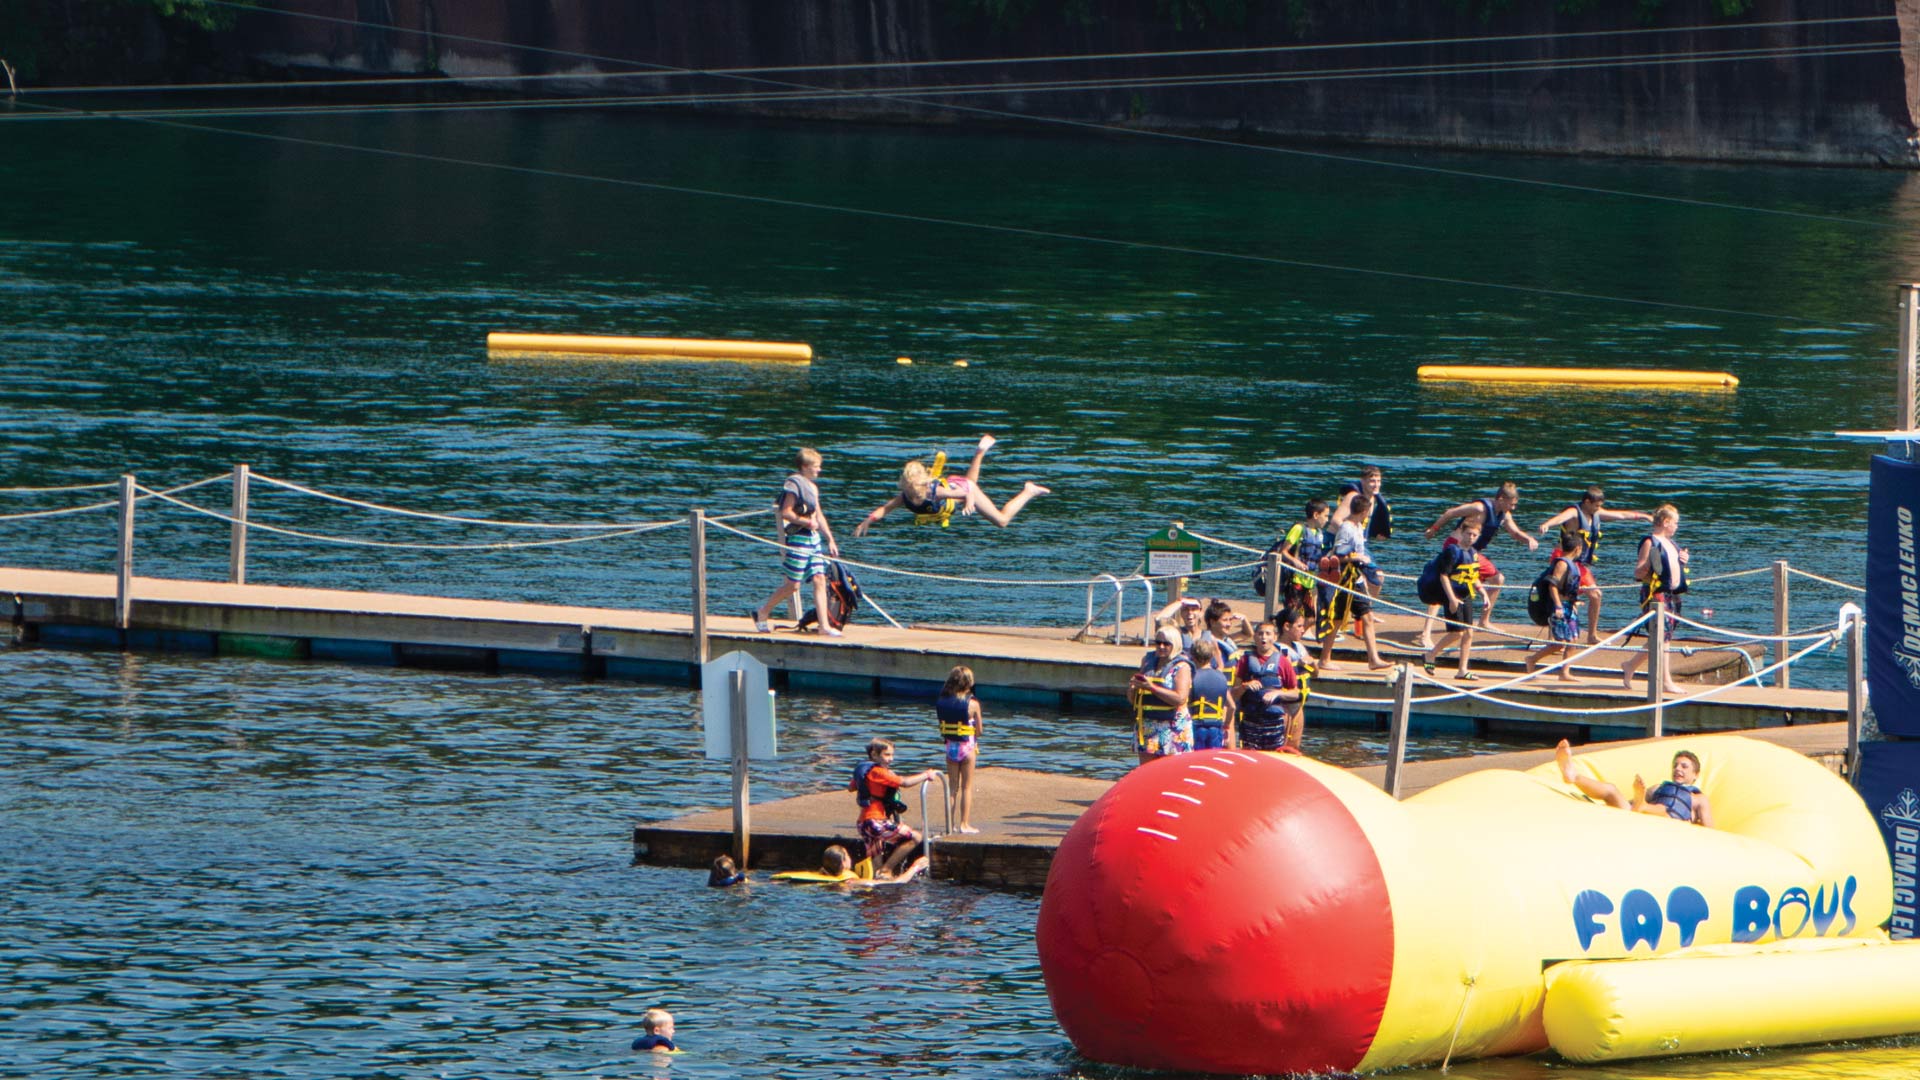 Swimming, Water Slide & Inflatable Water Obstacles at Brownstone Park